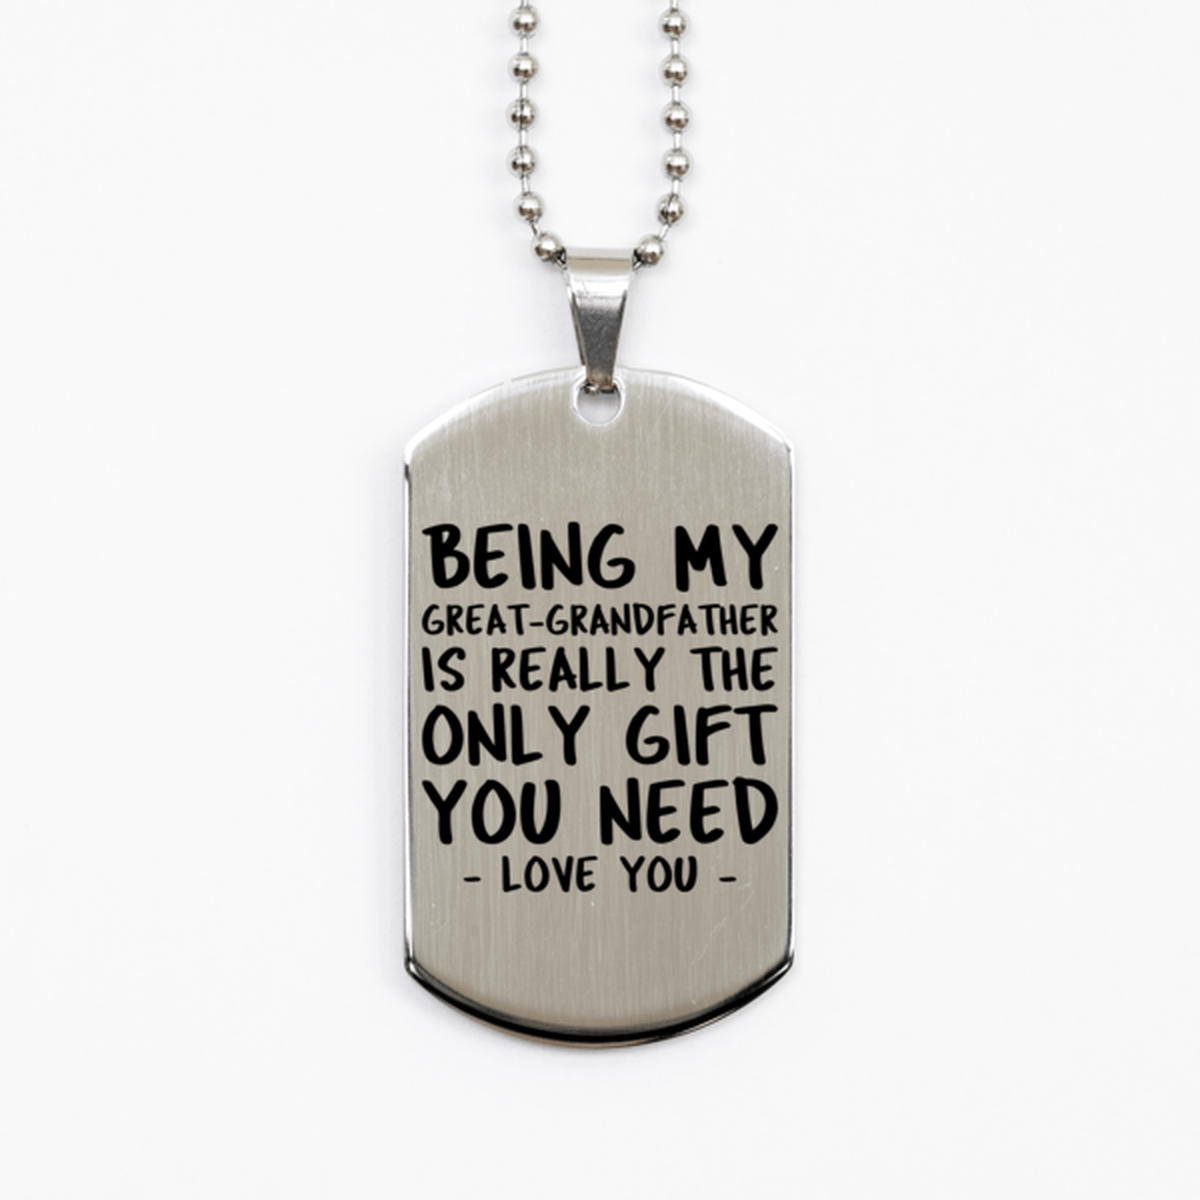 Funny Great-grandfather Silver Dog Tag Necklace, Being My Great-grandfather Is Really the Only Gift You Need, Best Birthday Gifts for Great-grandfather